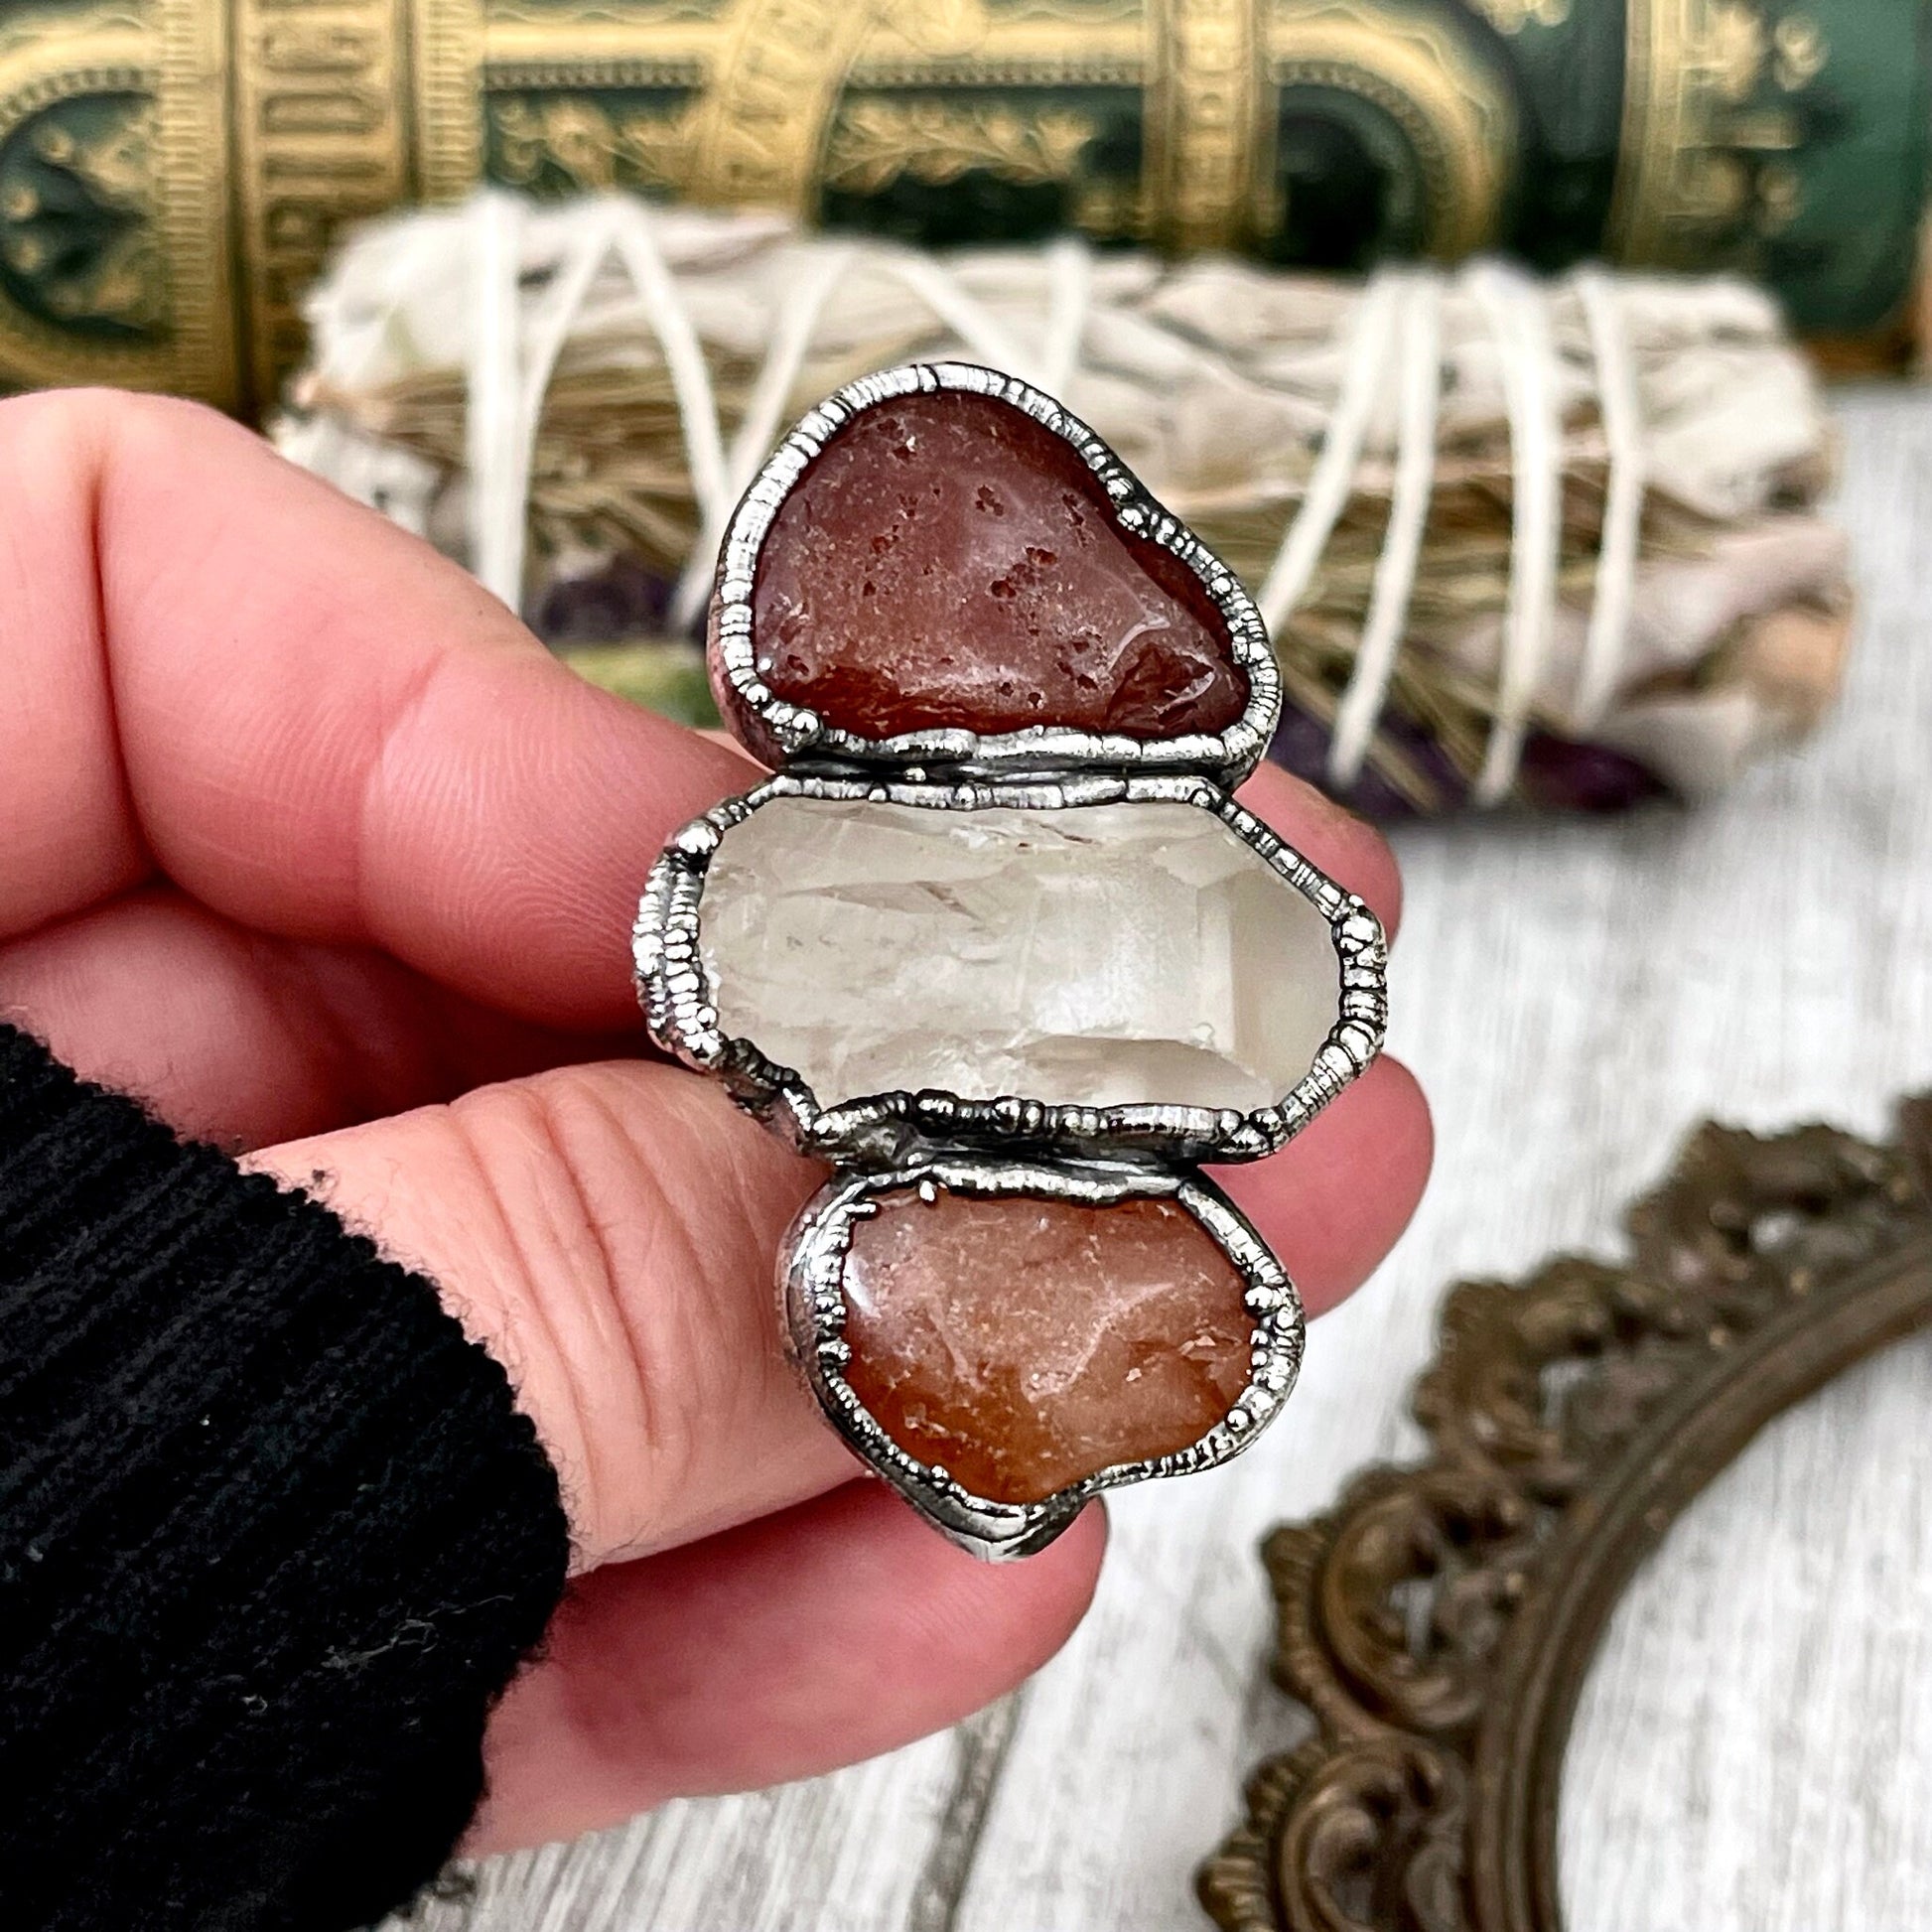 Size 8.5 Crystal Ring - Three Stone Ring Red Carnelian Clear Quartz Silver Ring / Foxlark Collection - One of a Kind / Big Crystal Jewelry